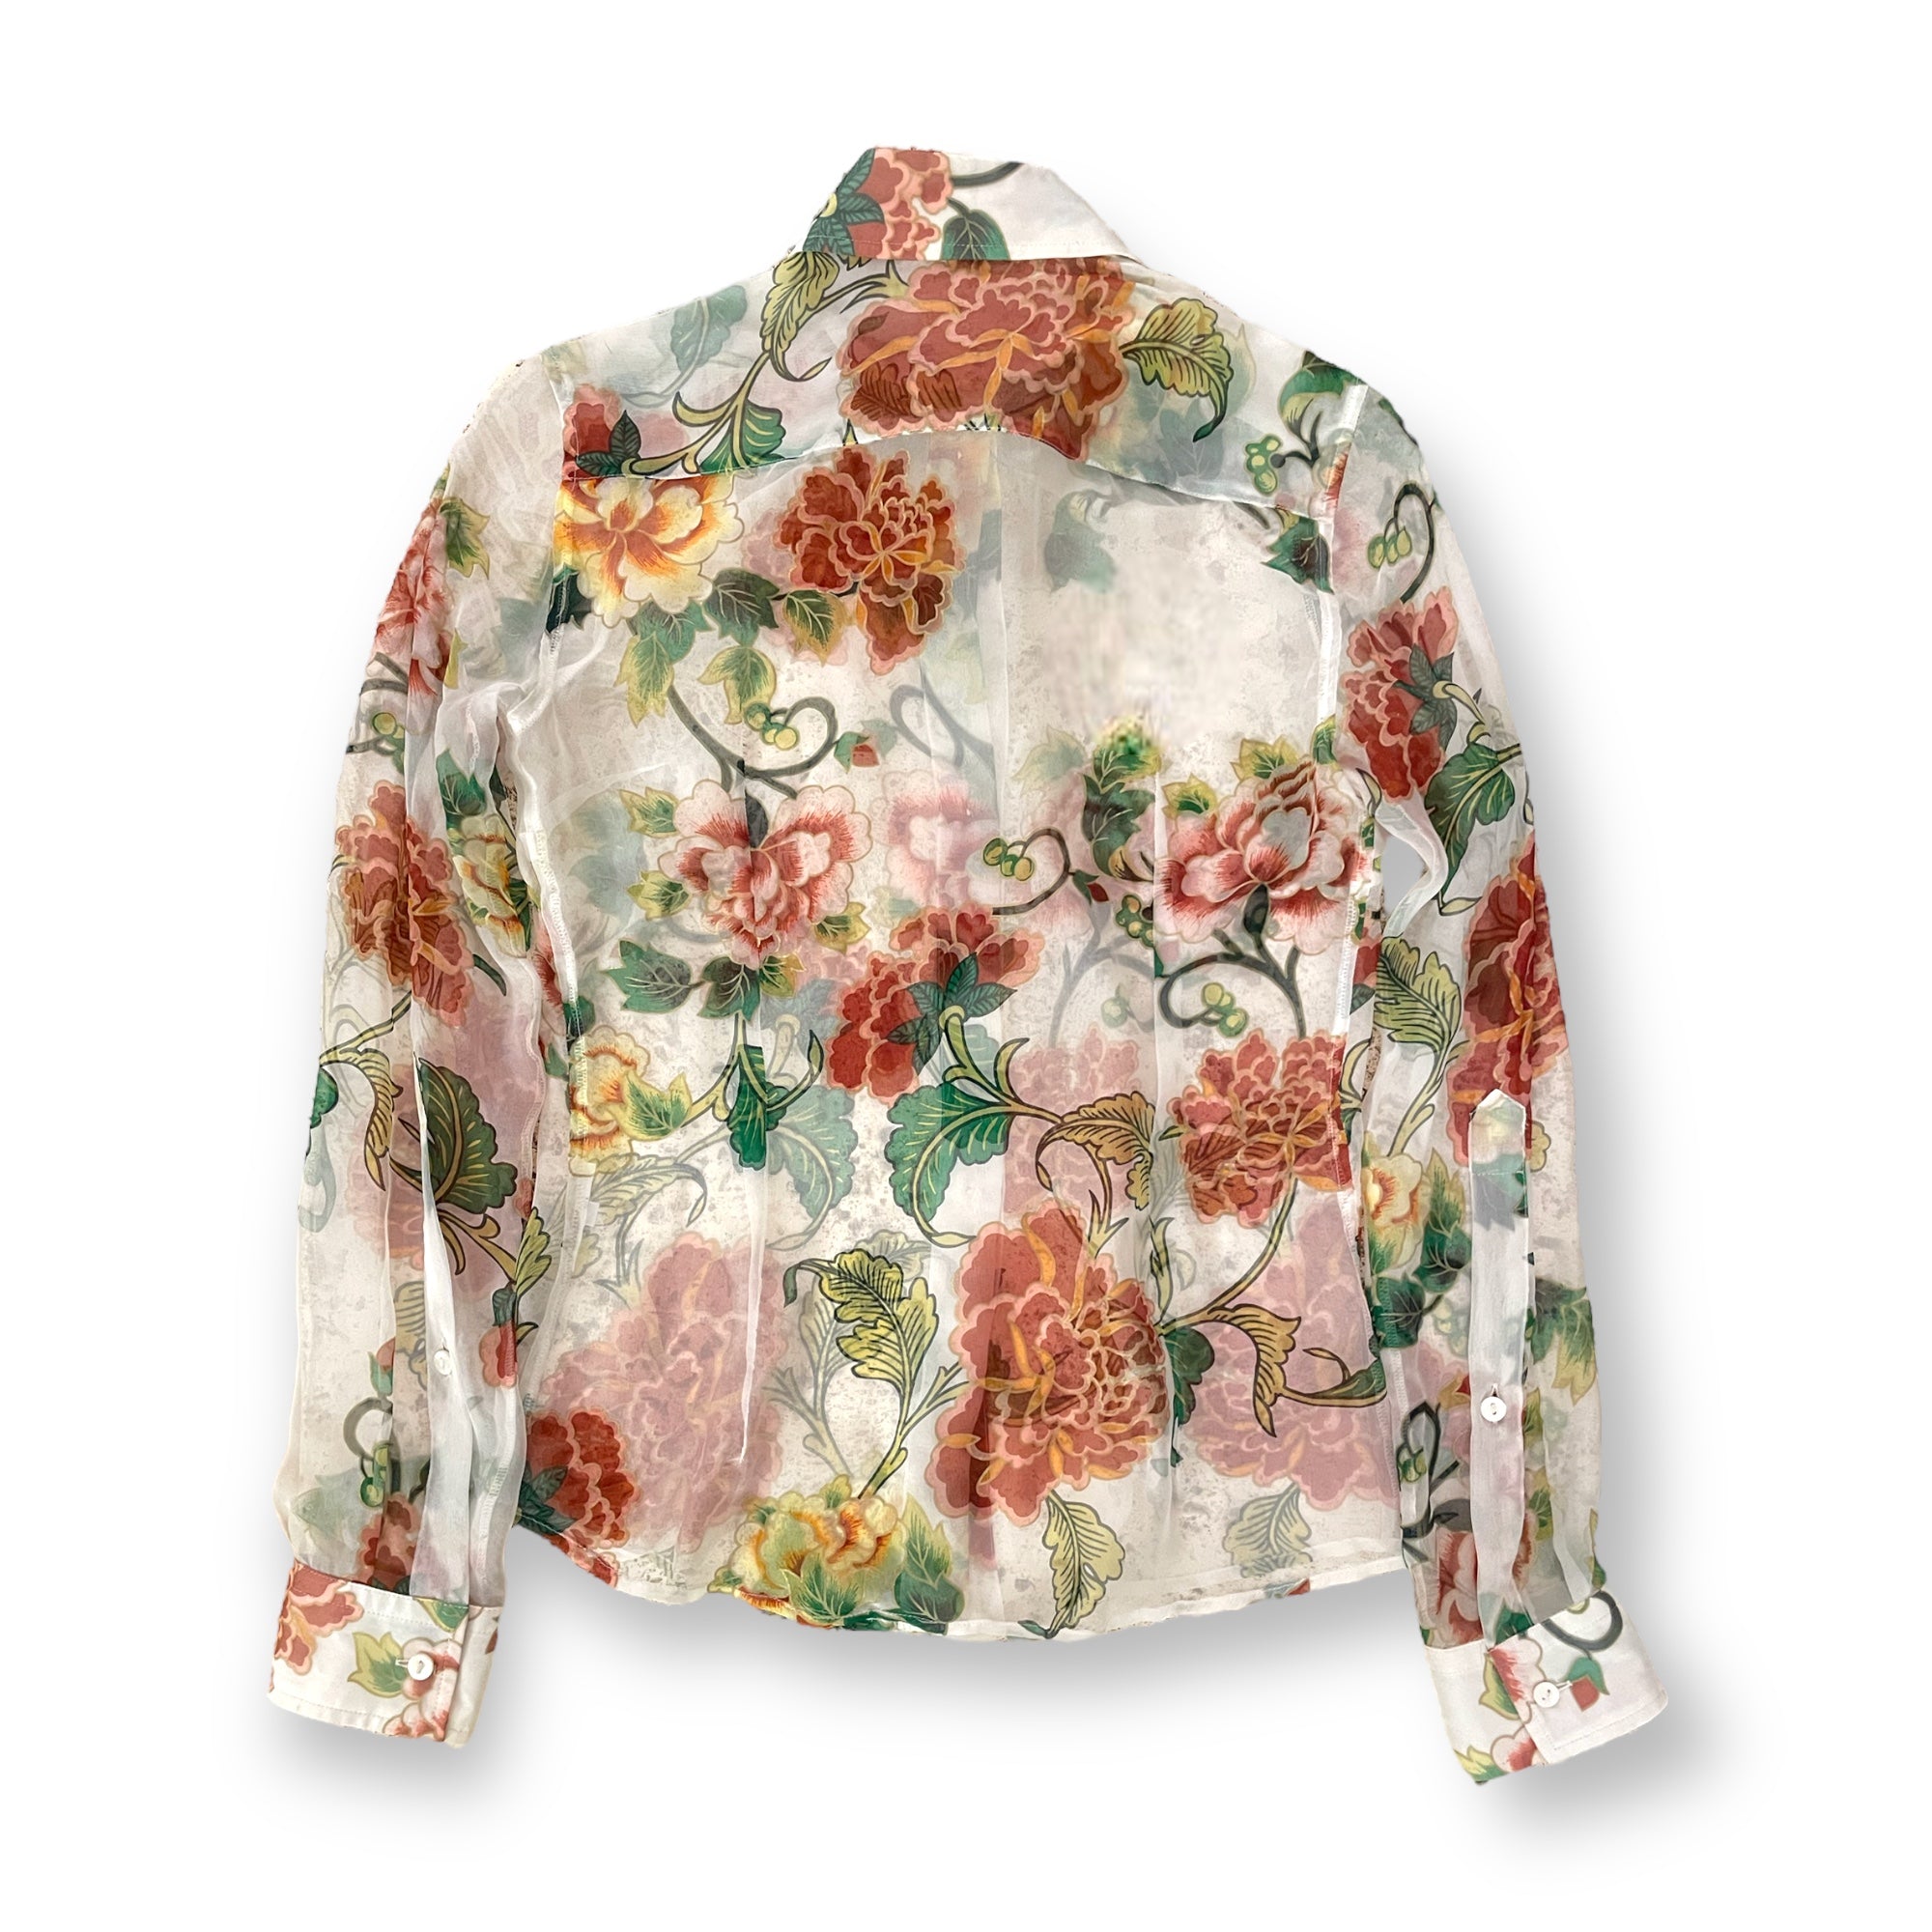 DOLCE & GABBANA Made in Italy Floral Silk Button Down Top